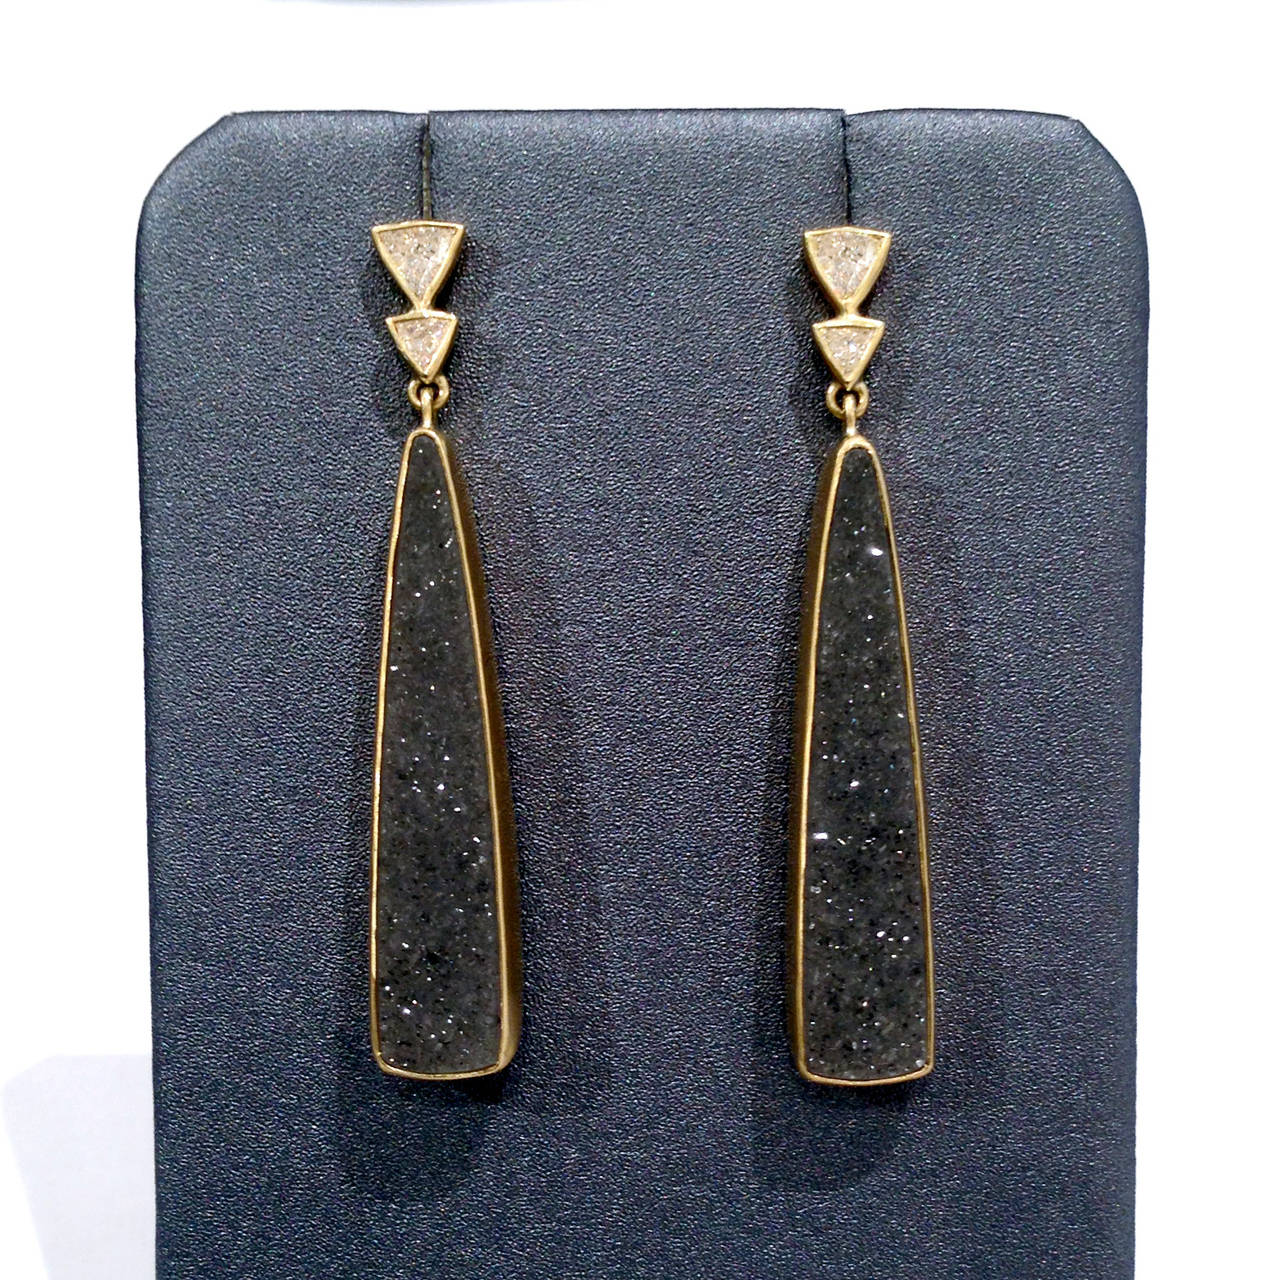 One-of-a-Kind Drop Earrings handcrafted in 18k yellow gold showcasing a matched pair of bezel-set shimmering gray druzy agate and complemented with four bezel-set trillion-cut white diamonds totaling 0.36 carats. Each earring weighs 3.6 grams.